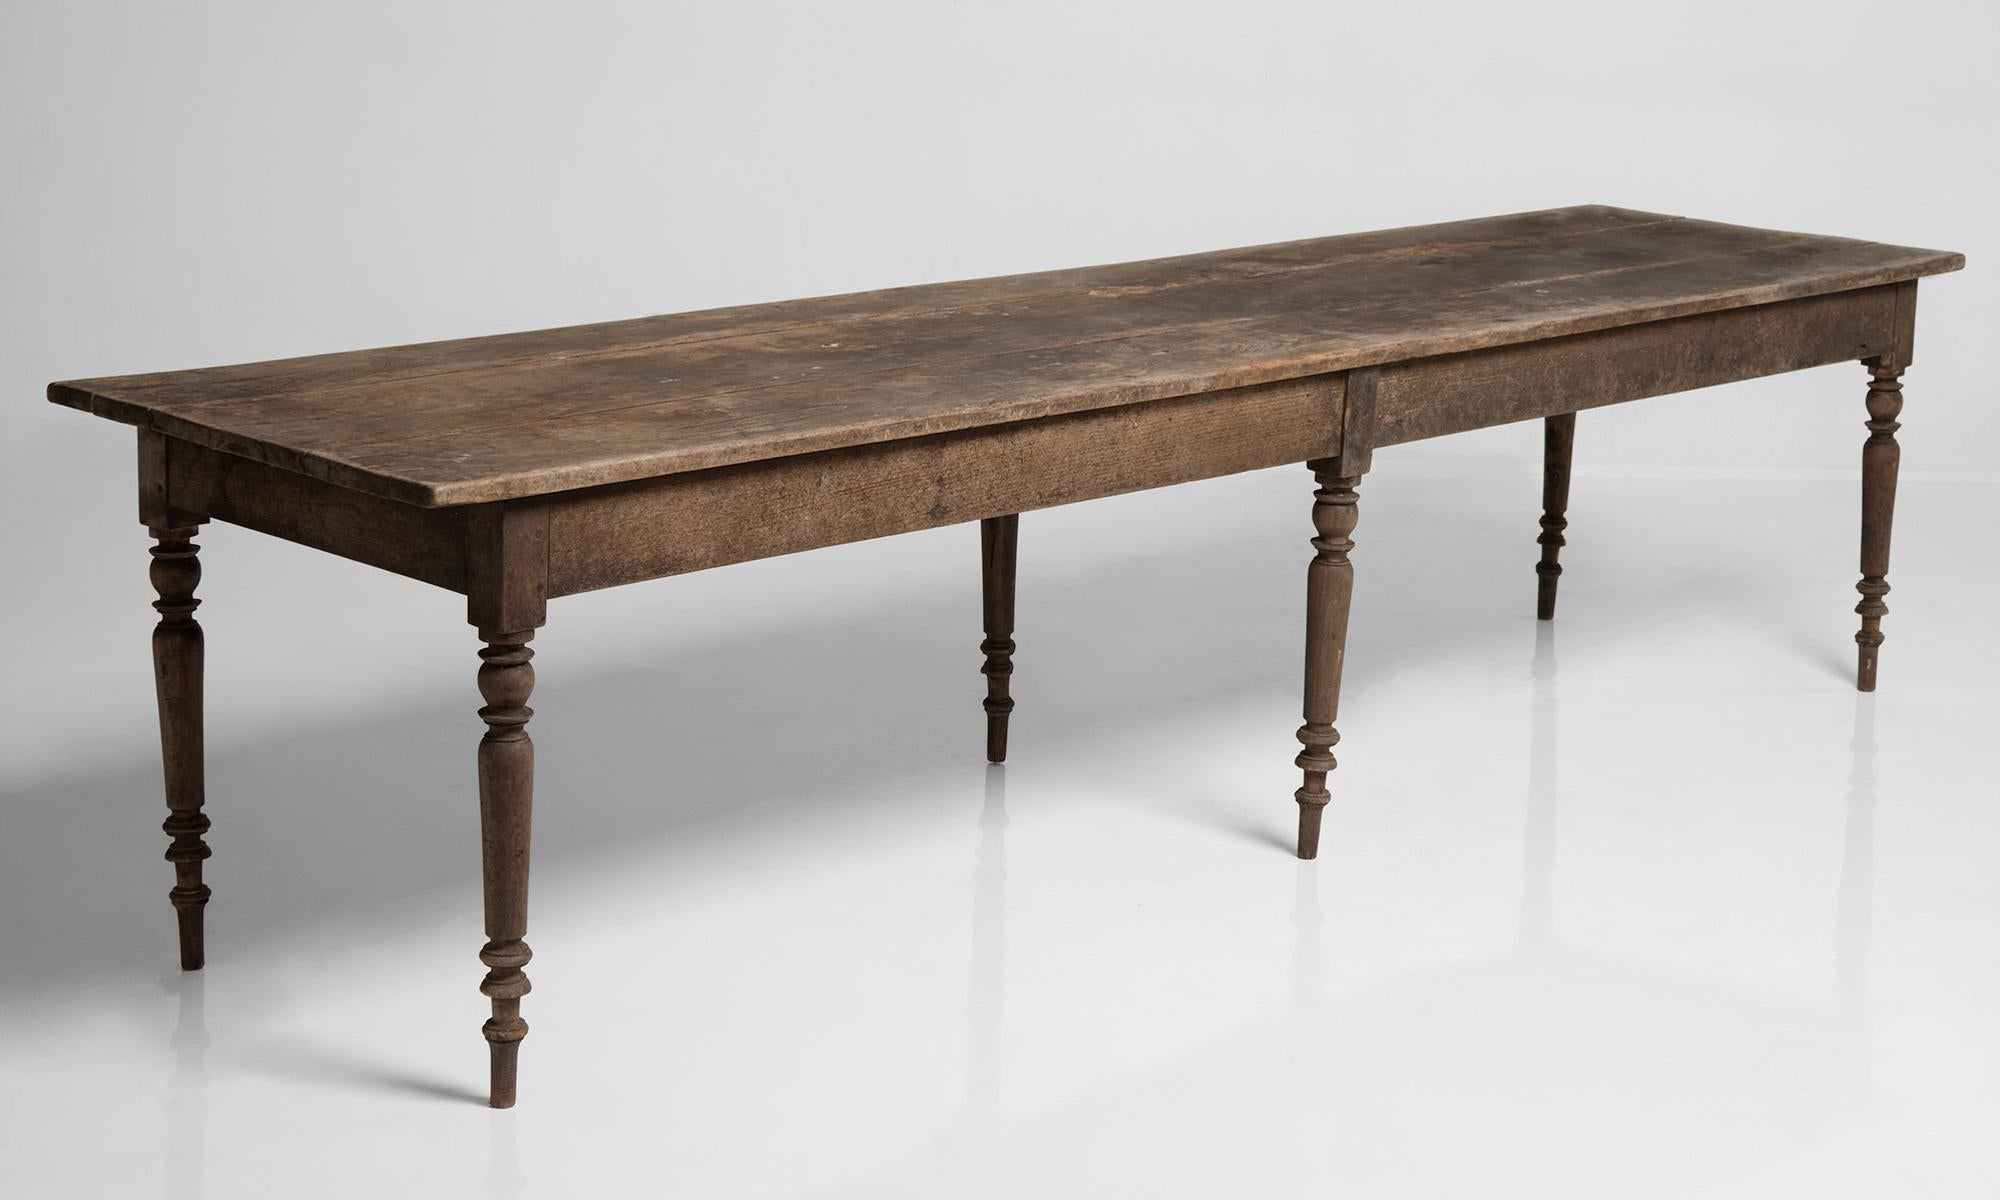 Chestnut dining table, England, circa 1840.

Single drawer table with a 3 plank top and turned legs. Amazing patina. Originally used at Notre-Dame de Langonnet Abbey.